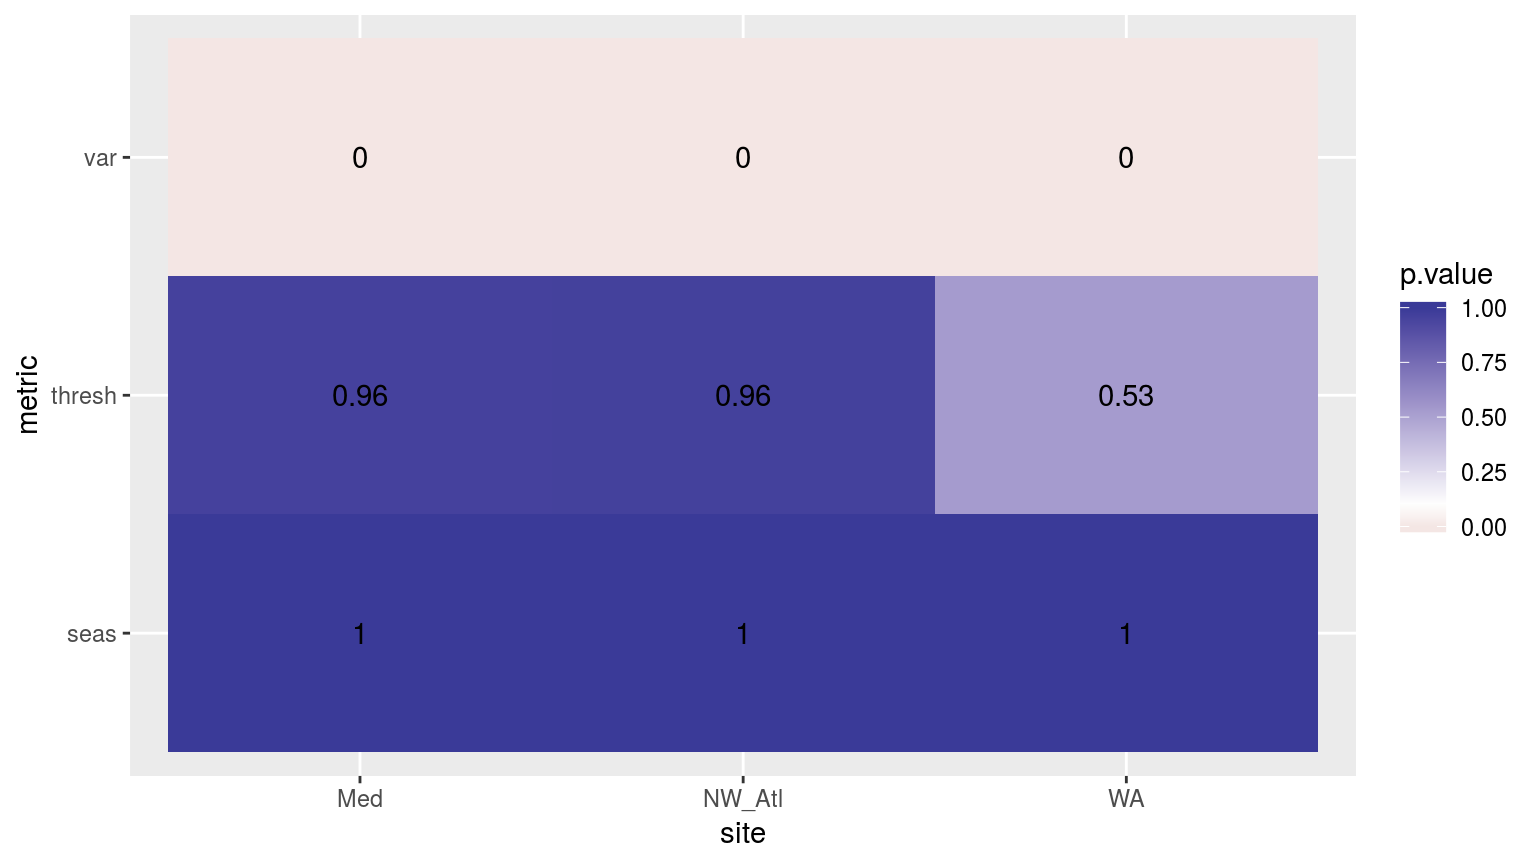 Heatmap showing the ANOVA results for the comparisons of the clim values for the four different proportions of missing data. Only the variance in the climatologies are significantly different at p < 0.05.